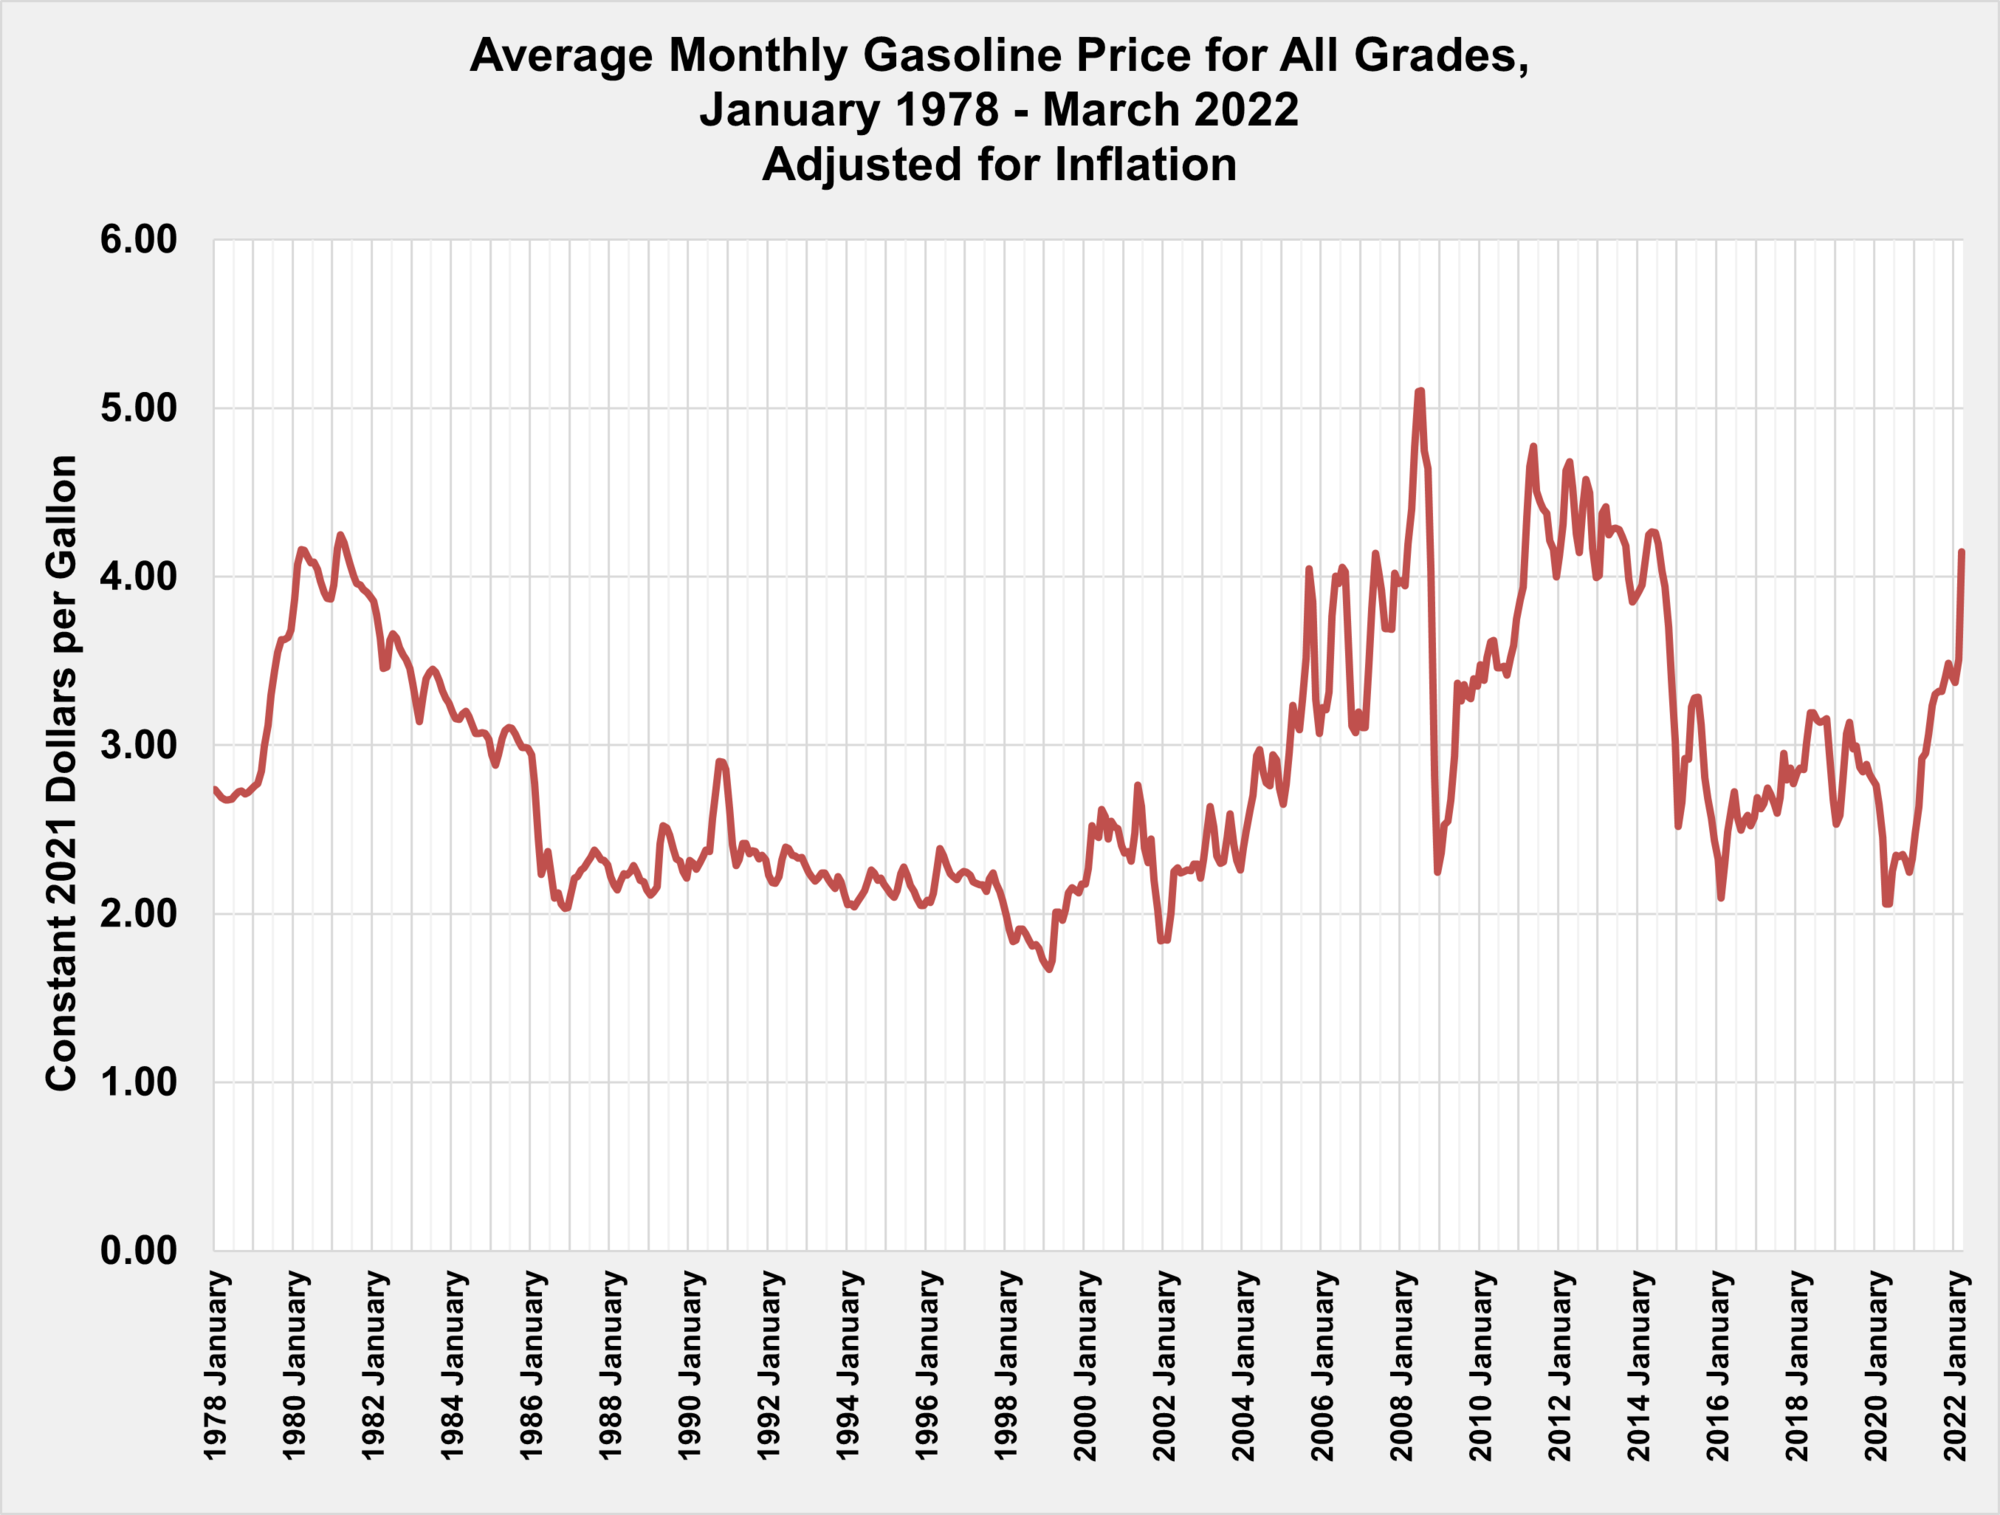 Average Monthly Gasoline Price for All Grades, January 1978 - March 2022, Adjusted for Inflation